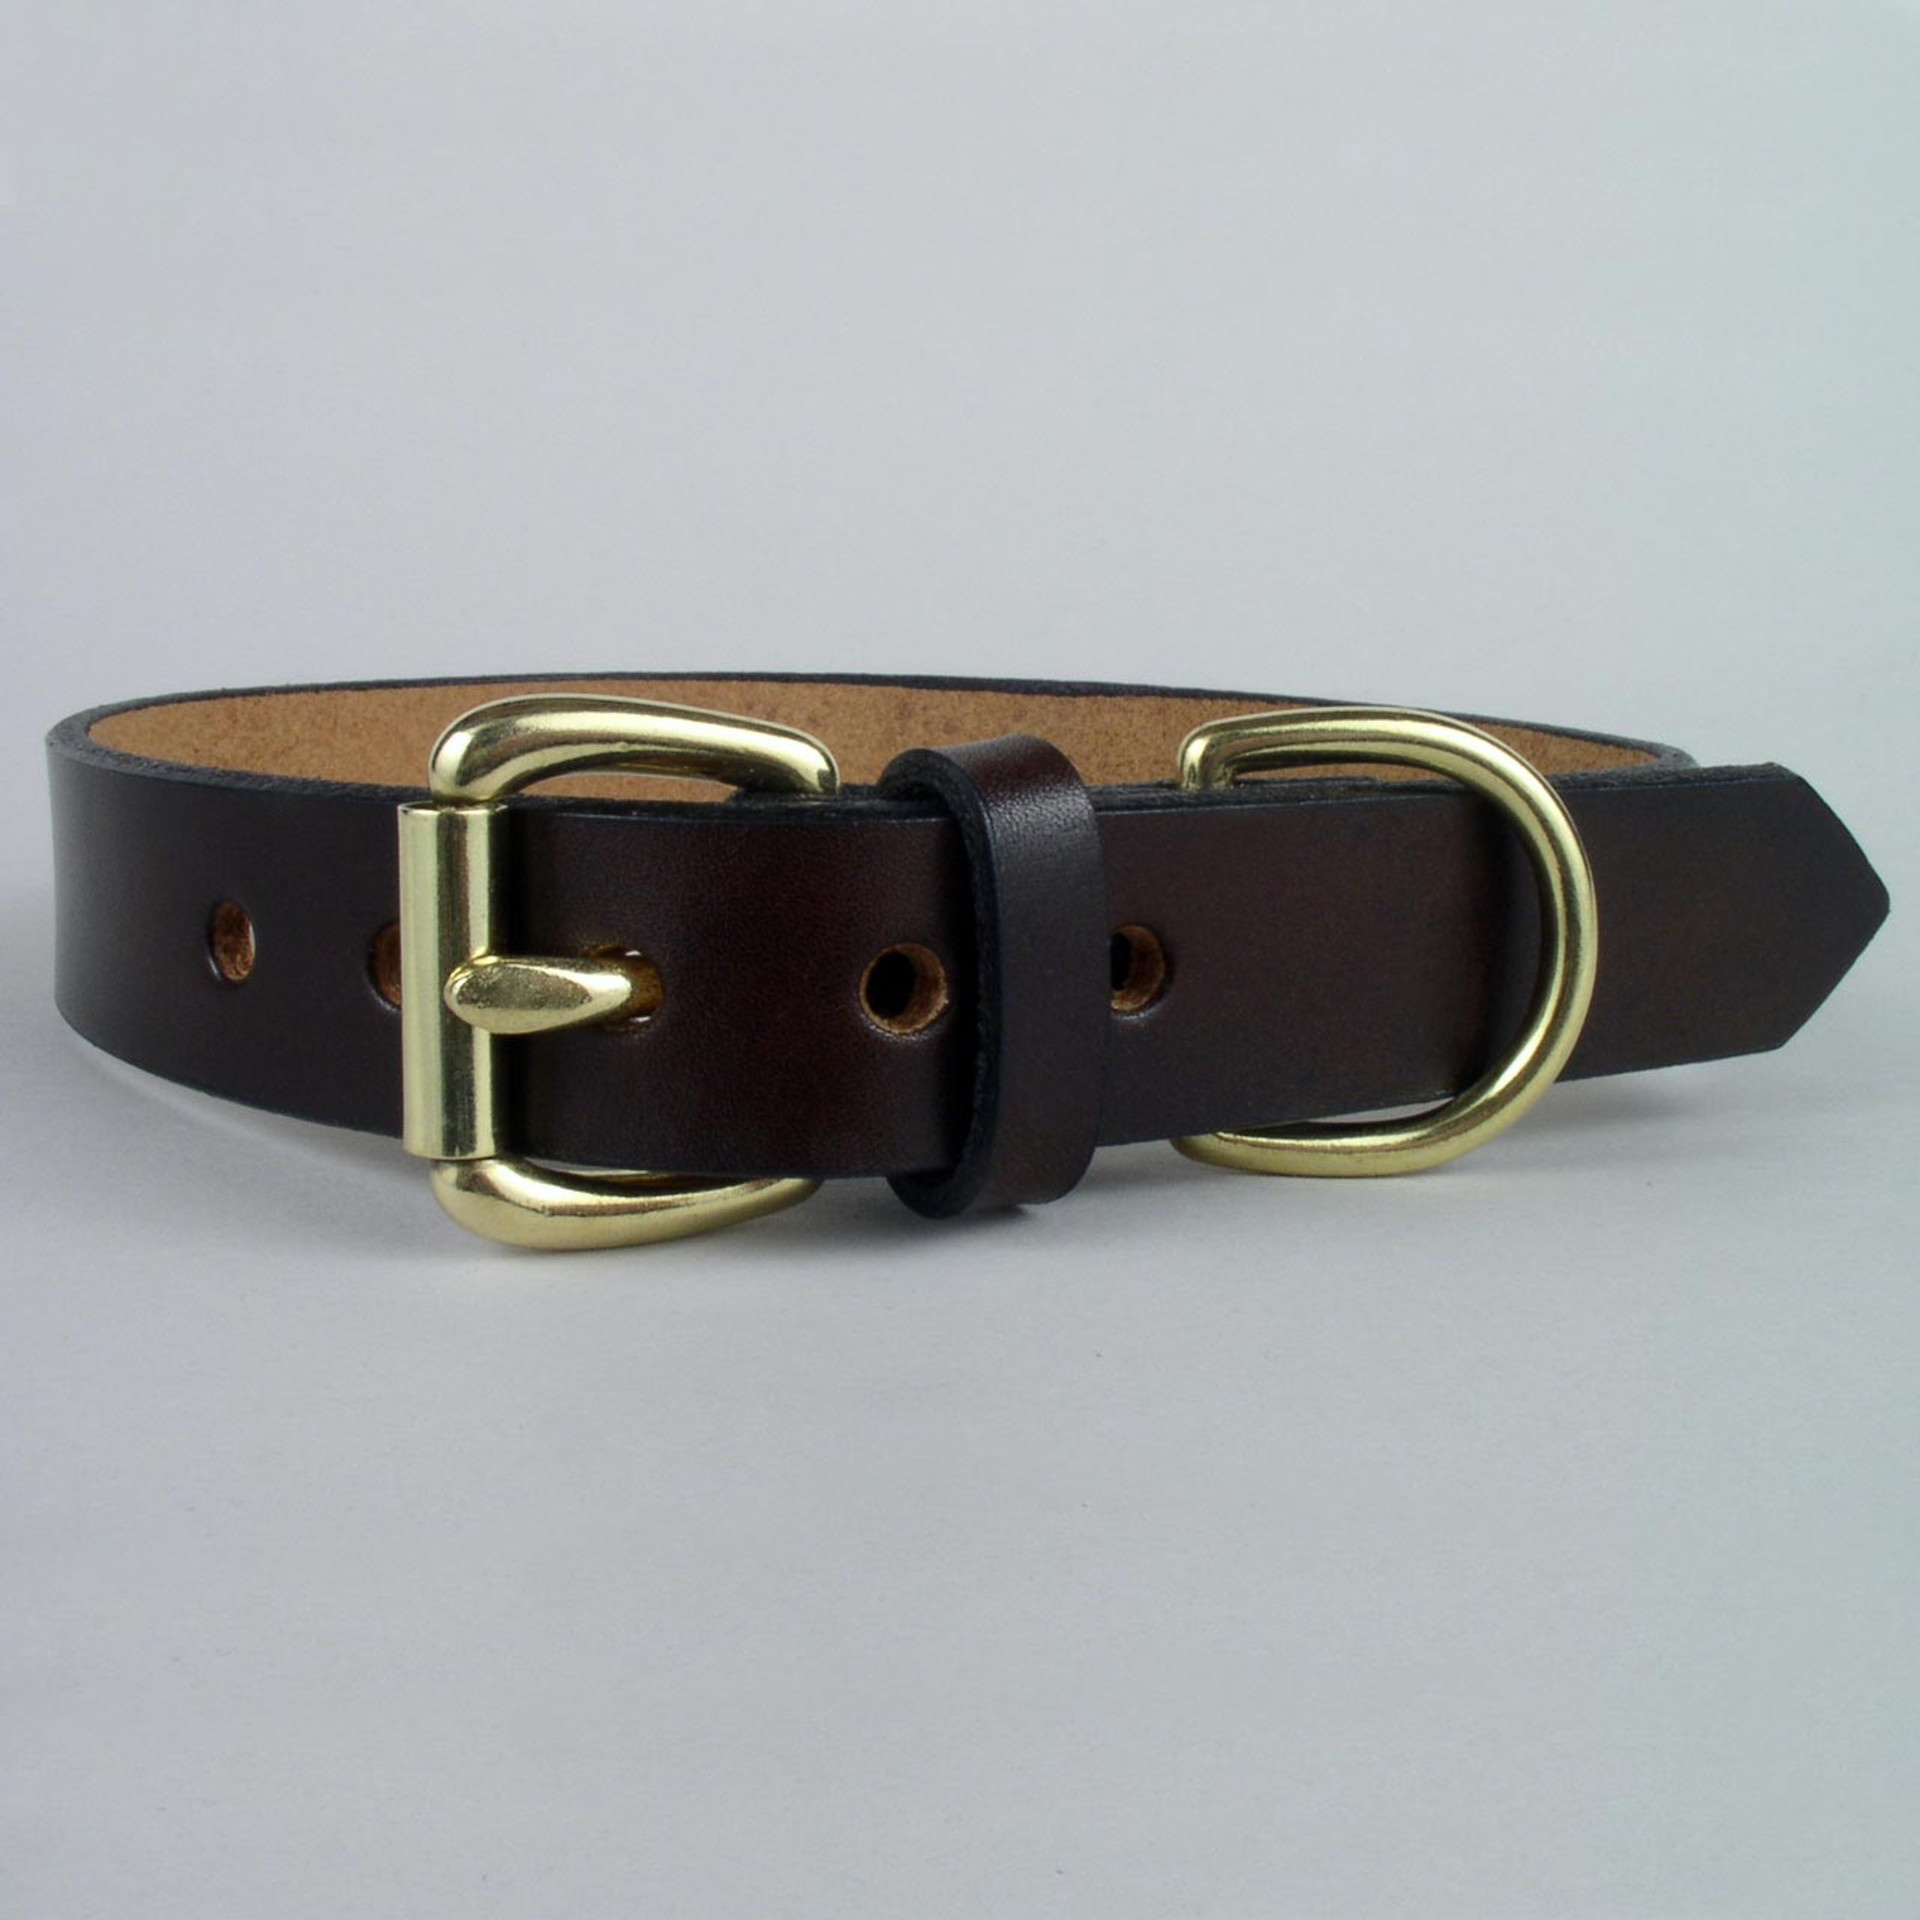 Personalized Plain Leather Dog Collar 3/4